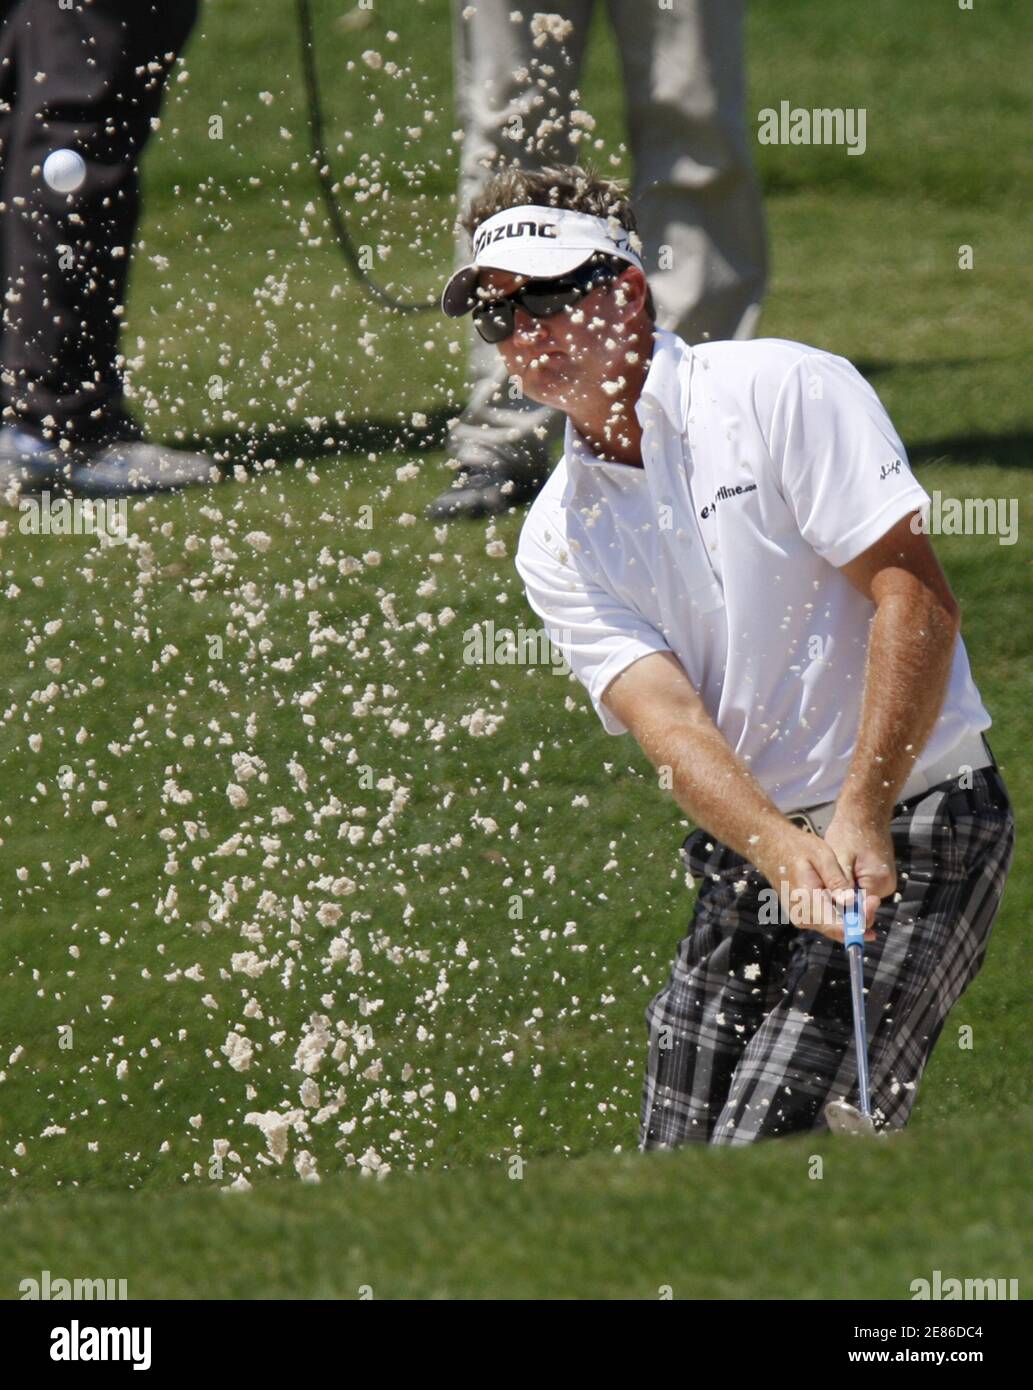 Brian Gay hits out of a greenside bunker on the seventh hole during the final round of the St. Jude Classic golf tournament at TPC Southwind in Memphis, Tennessee June 14, 2009.   REUTERS/Nikki Boertman    (UNITED STATES SPORT GOLF) Stock Photo